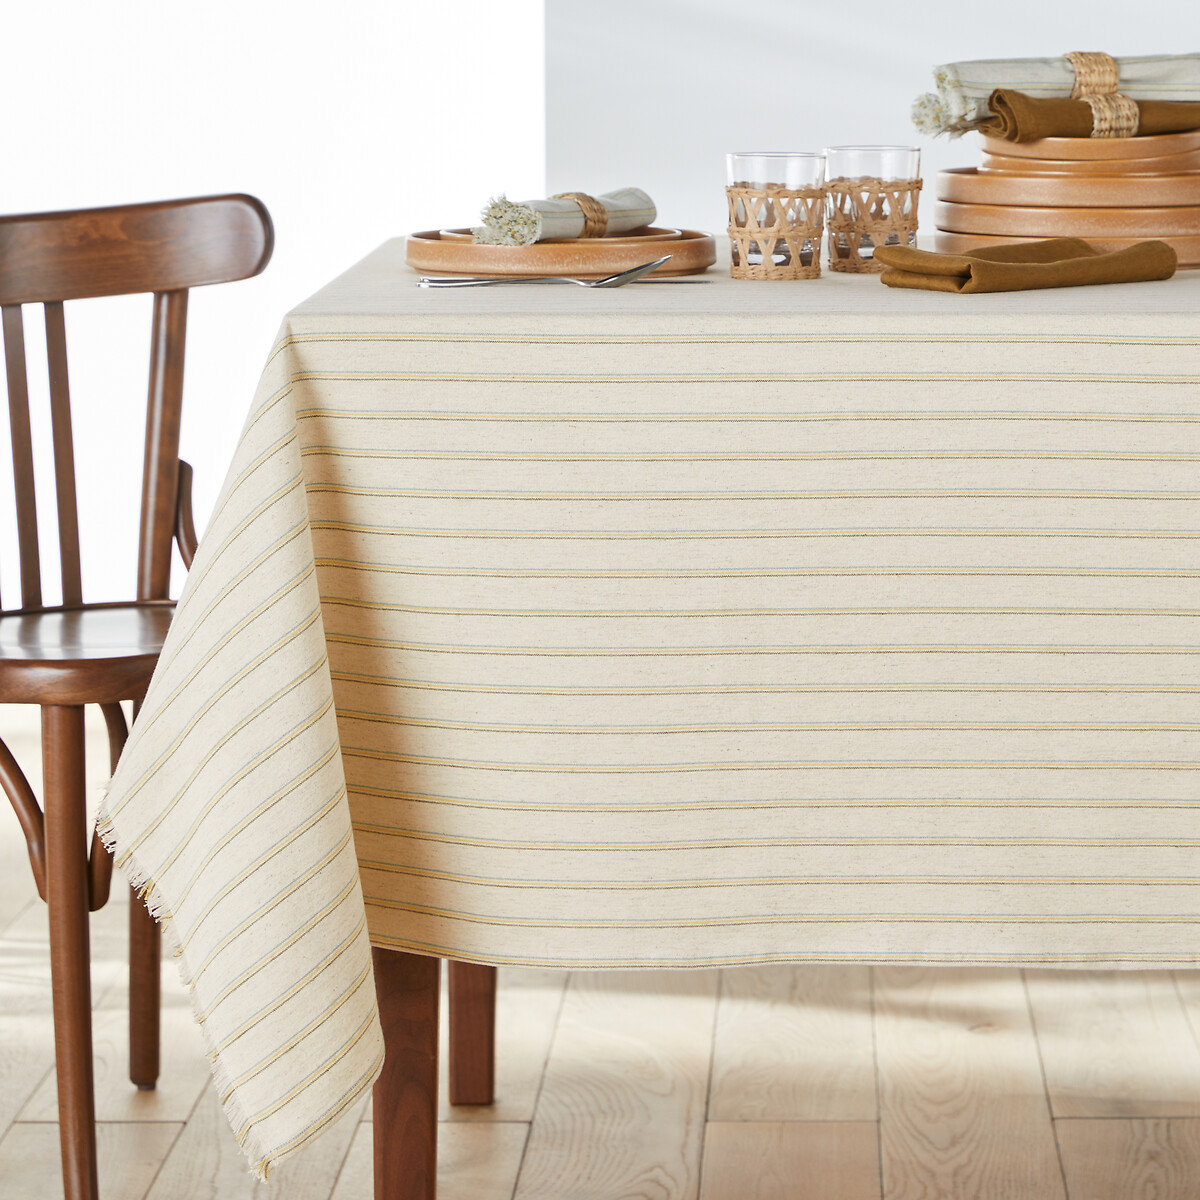 Lovnas Striped Woven-Dyed Cotton & Linen Tablecloth